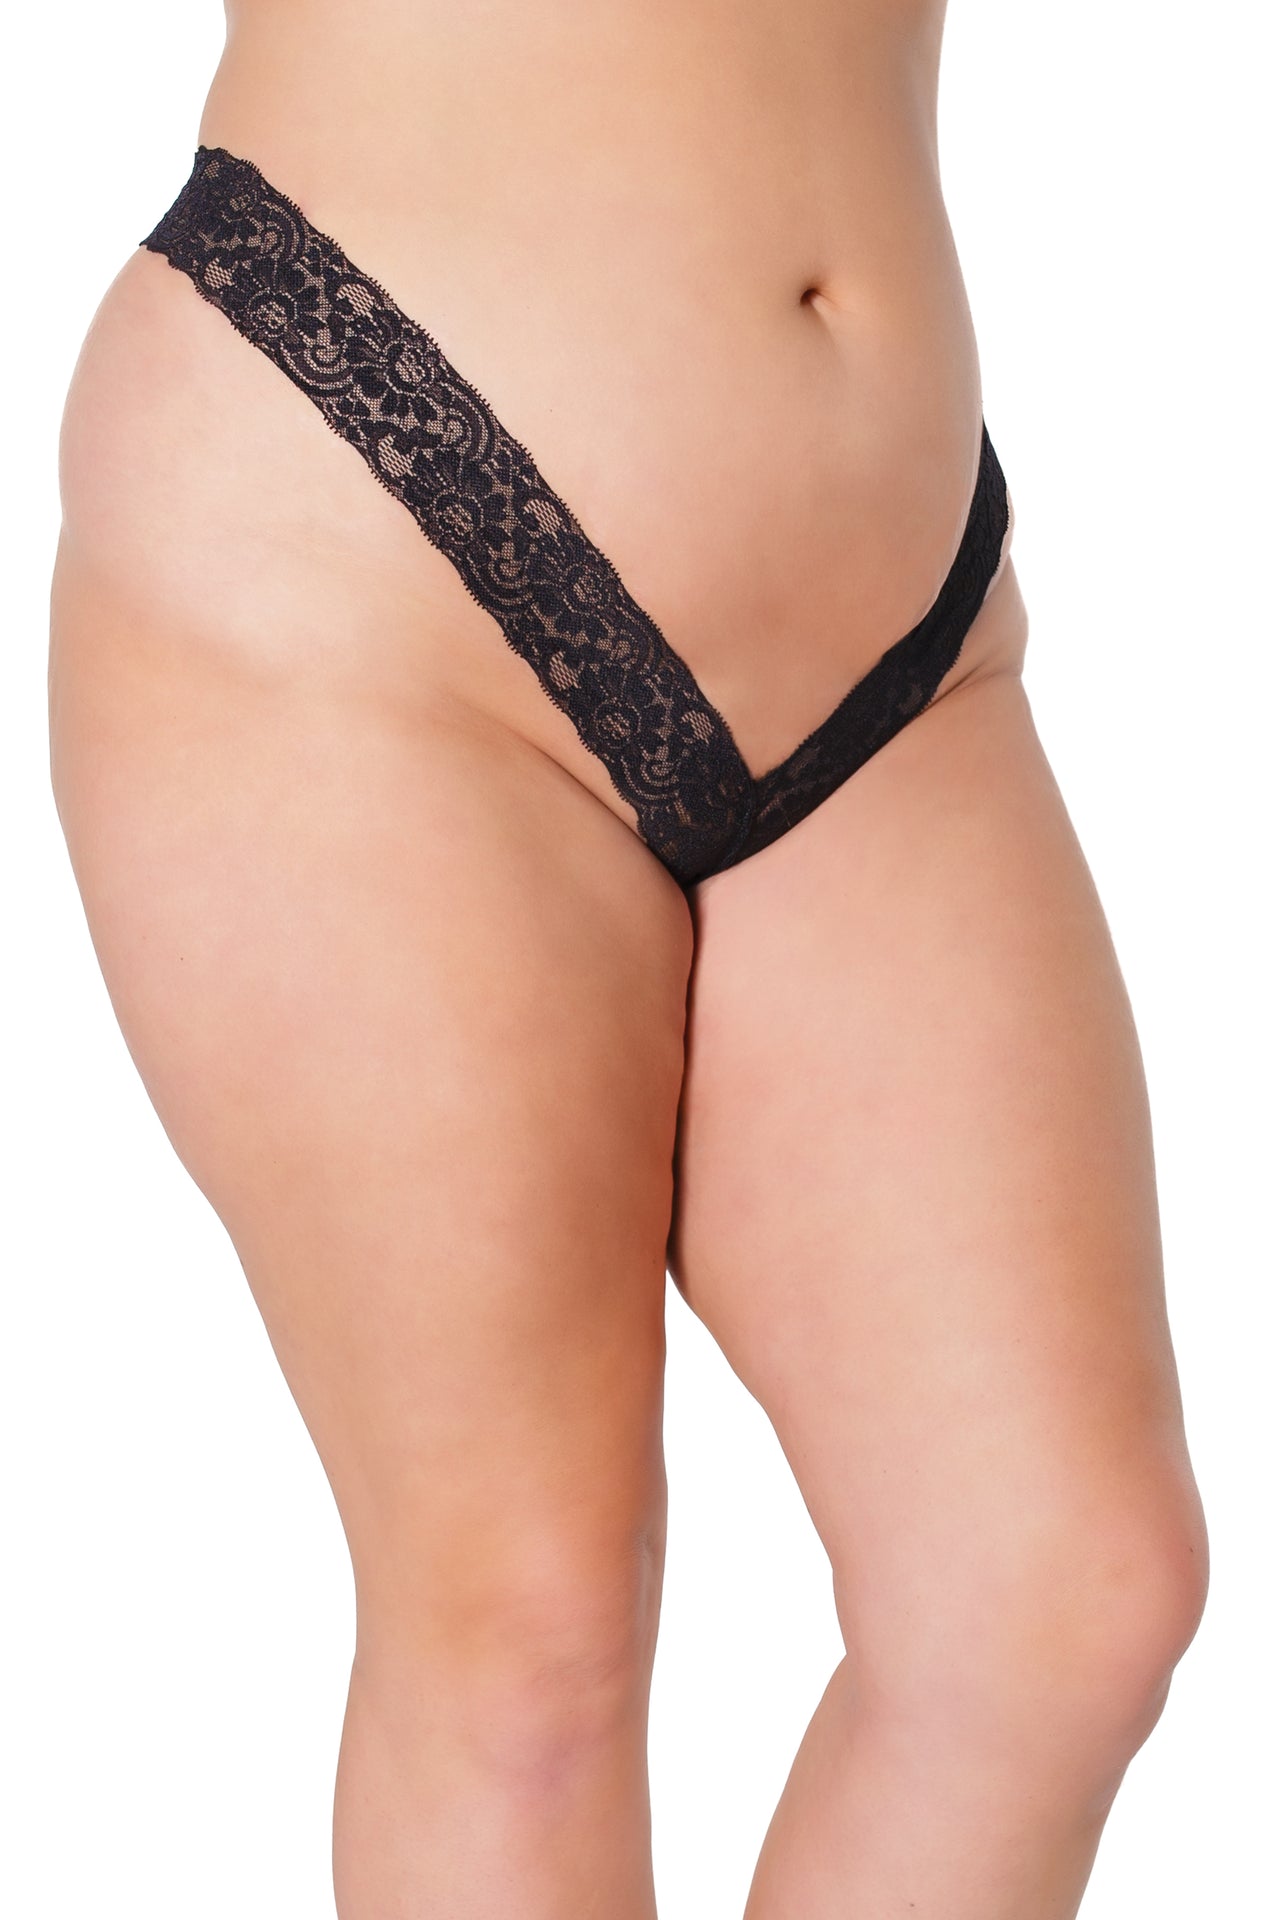 Coquette - 22331 - Thong - Stag Shop